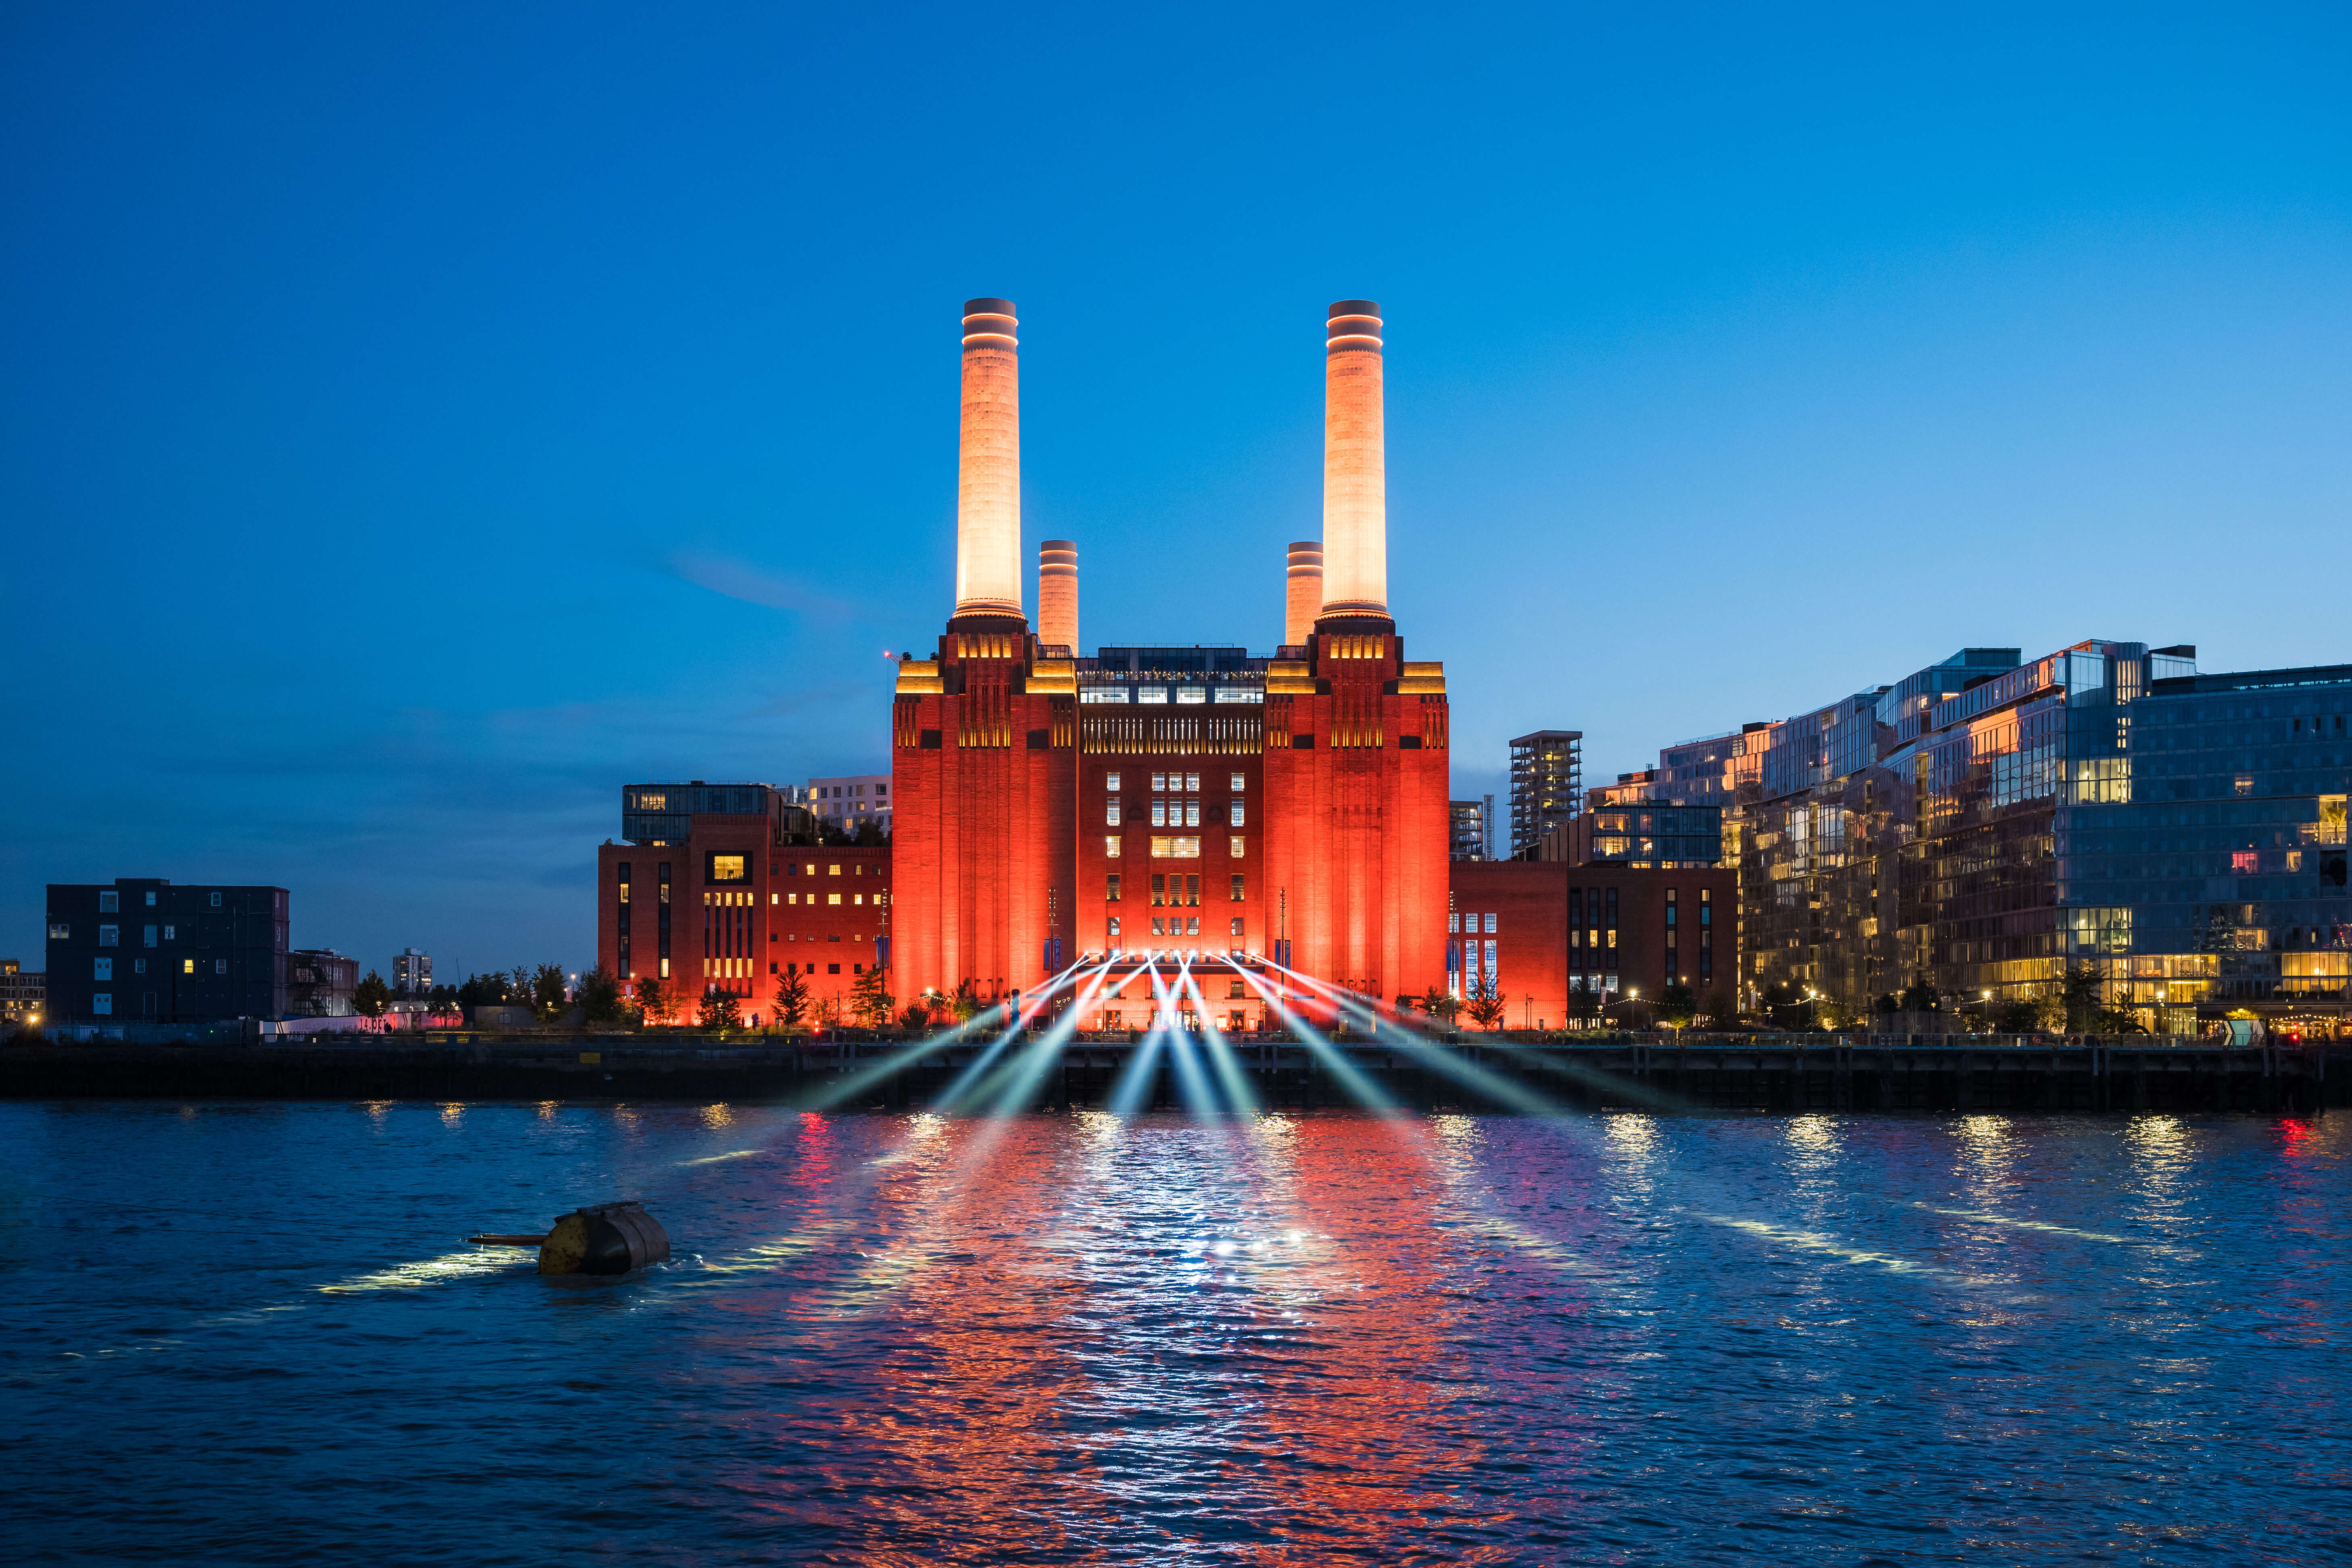 'The opening of Battersea Power Station and Electric Boulevard', Charlie Round Turner